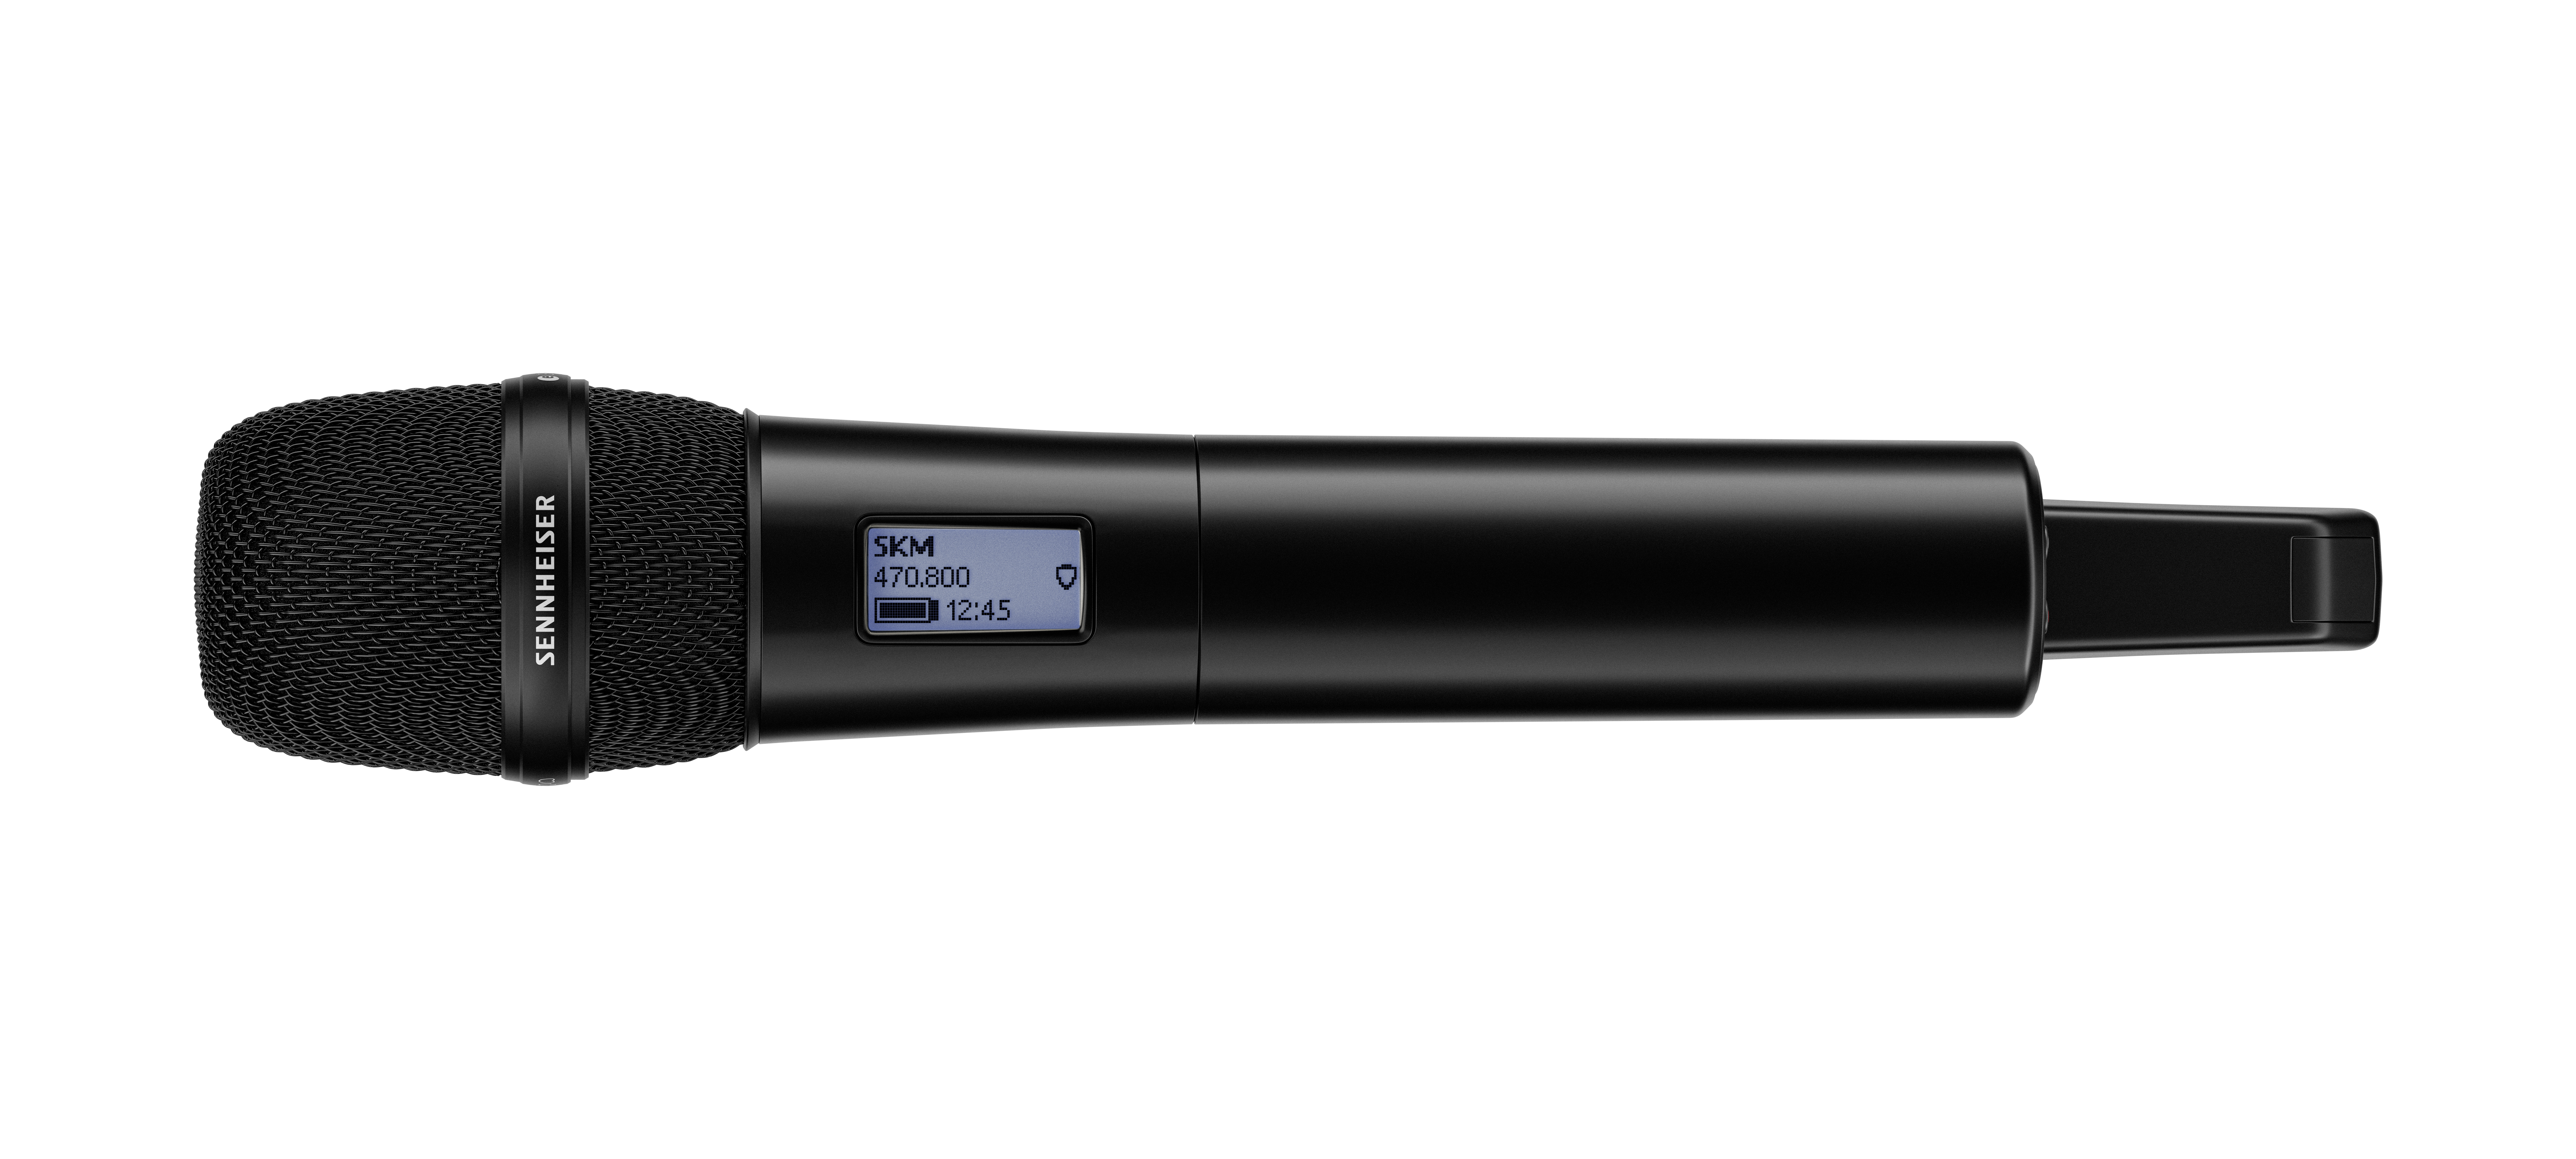 The handheld transmitter with e-ink display, available with optional, programmable mute switch